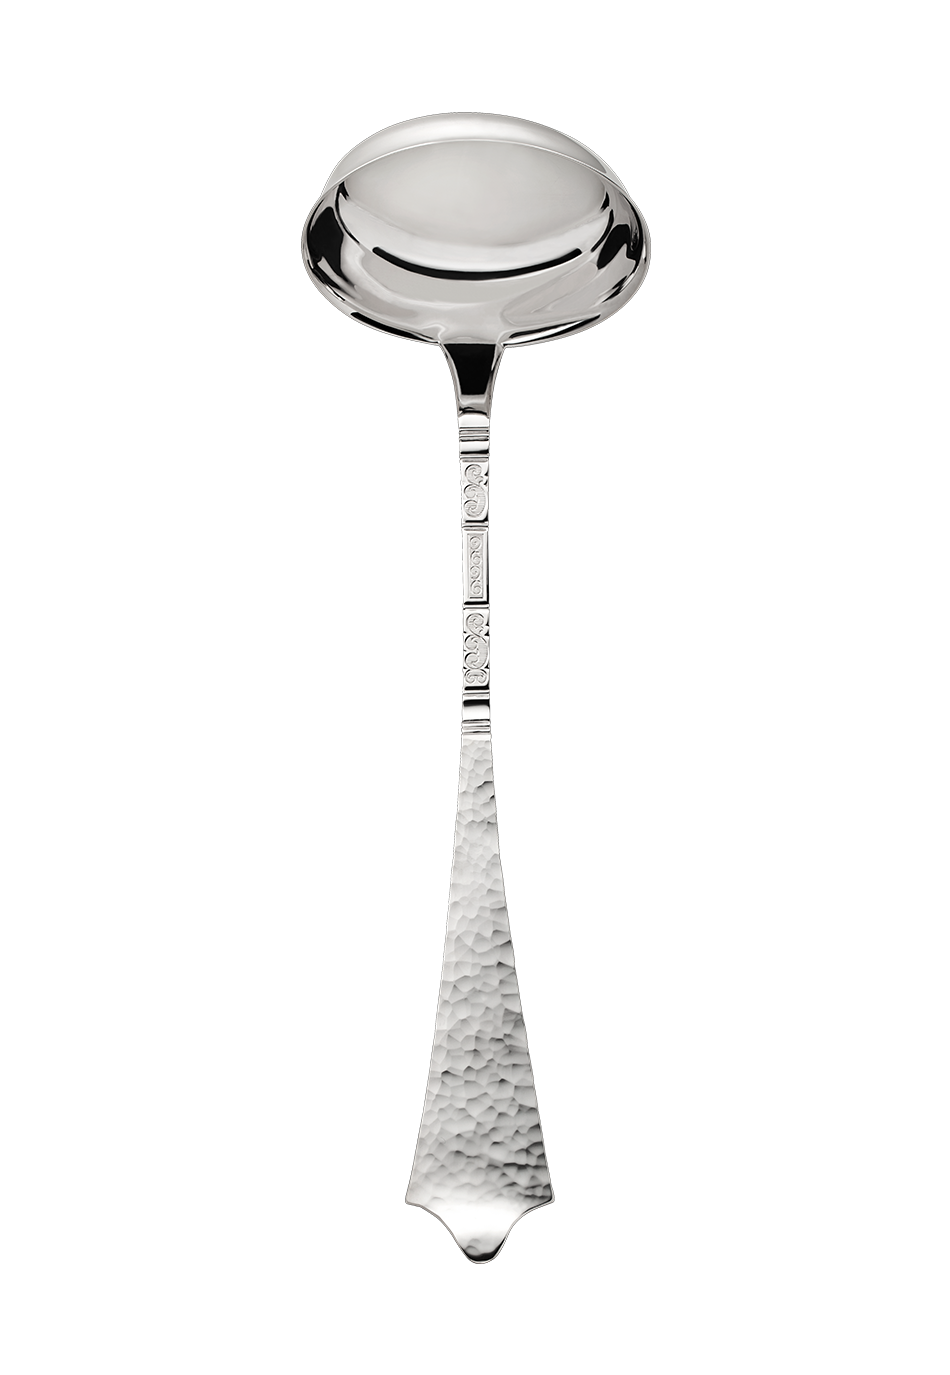 Hermitage Soup Ladle (150g massive silverplated)